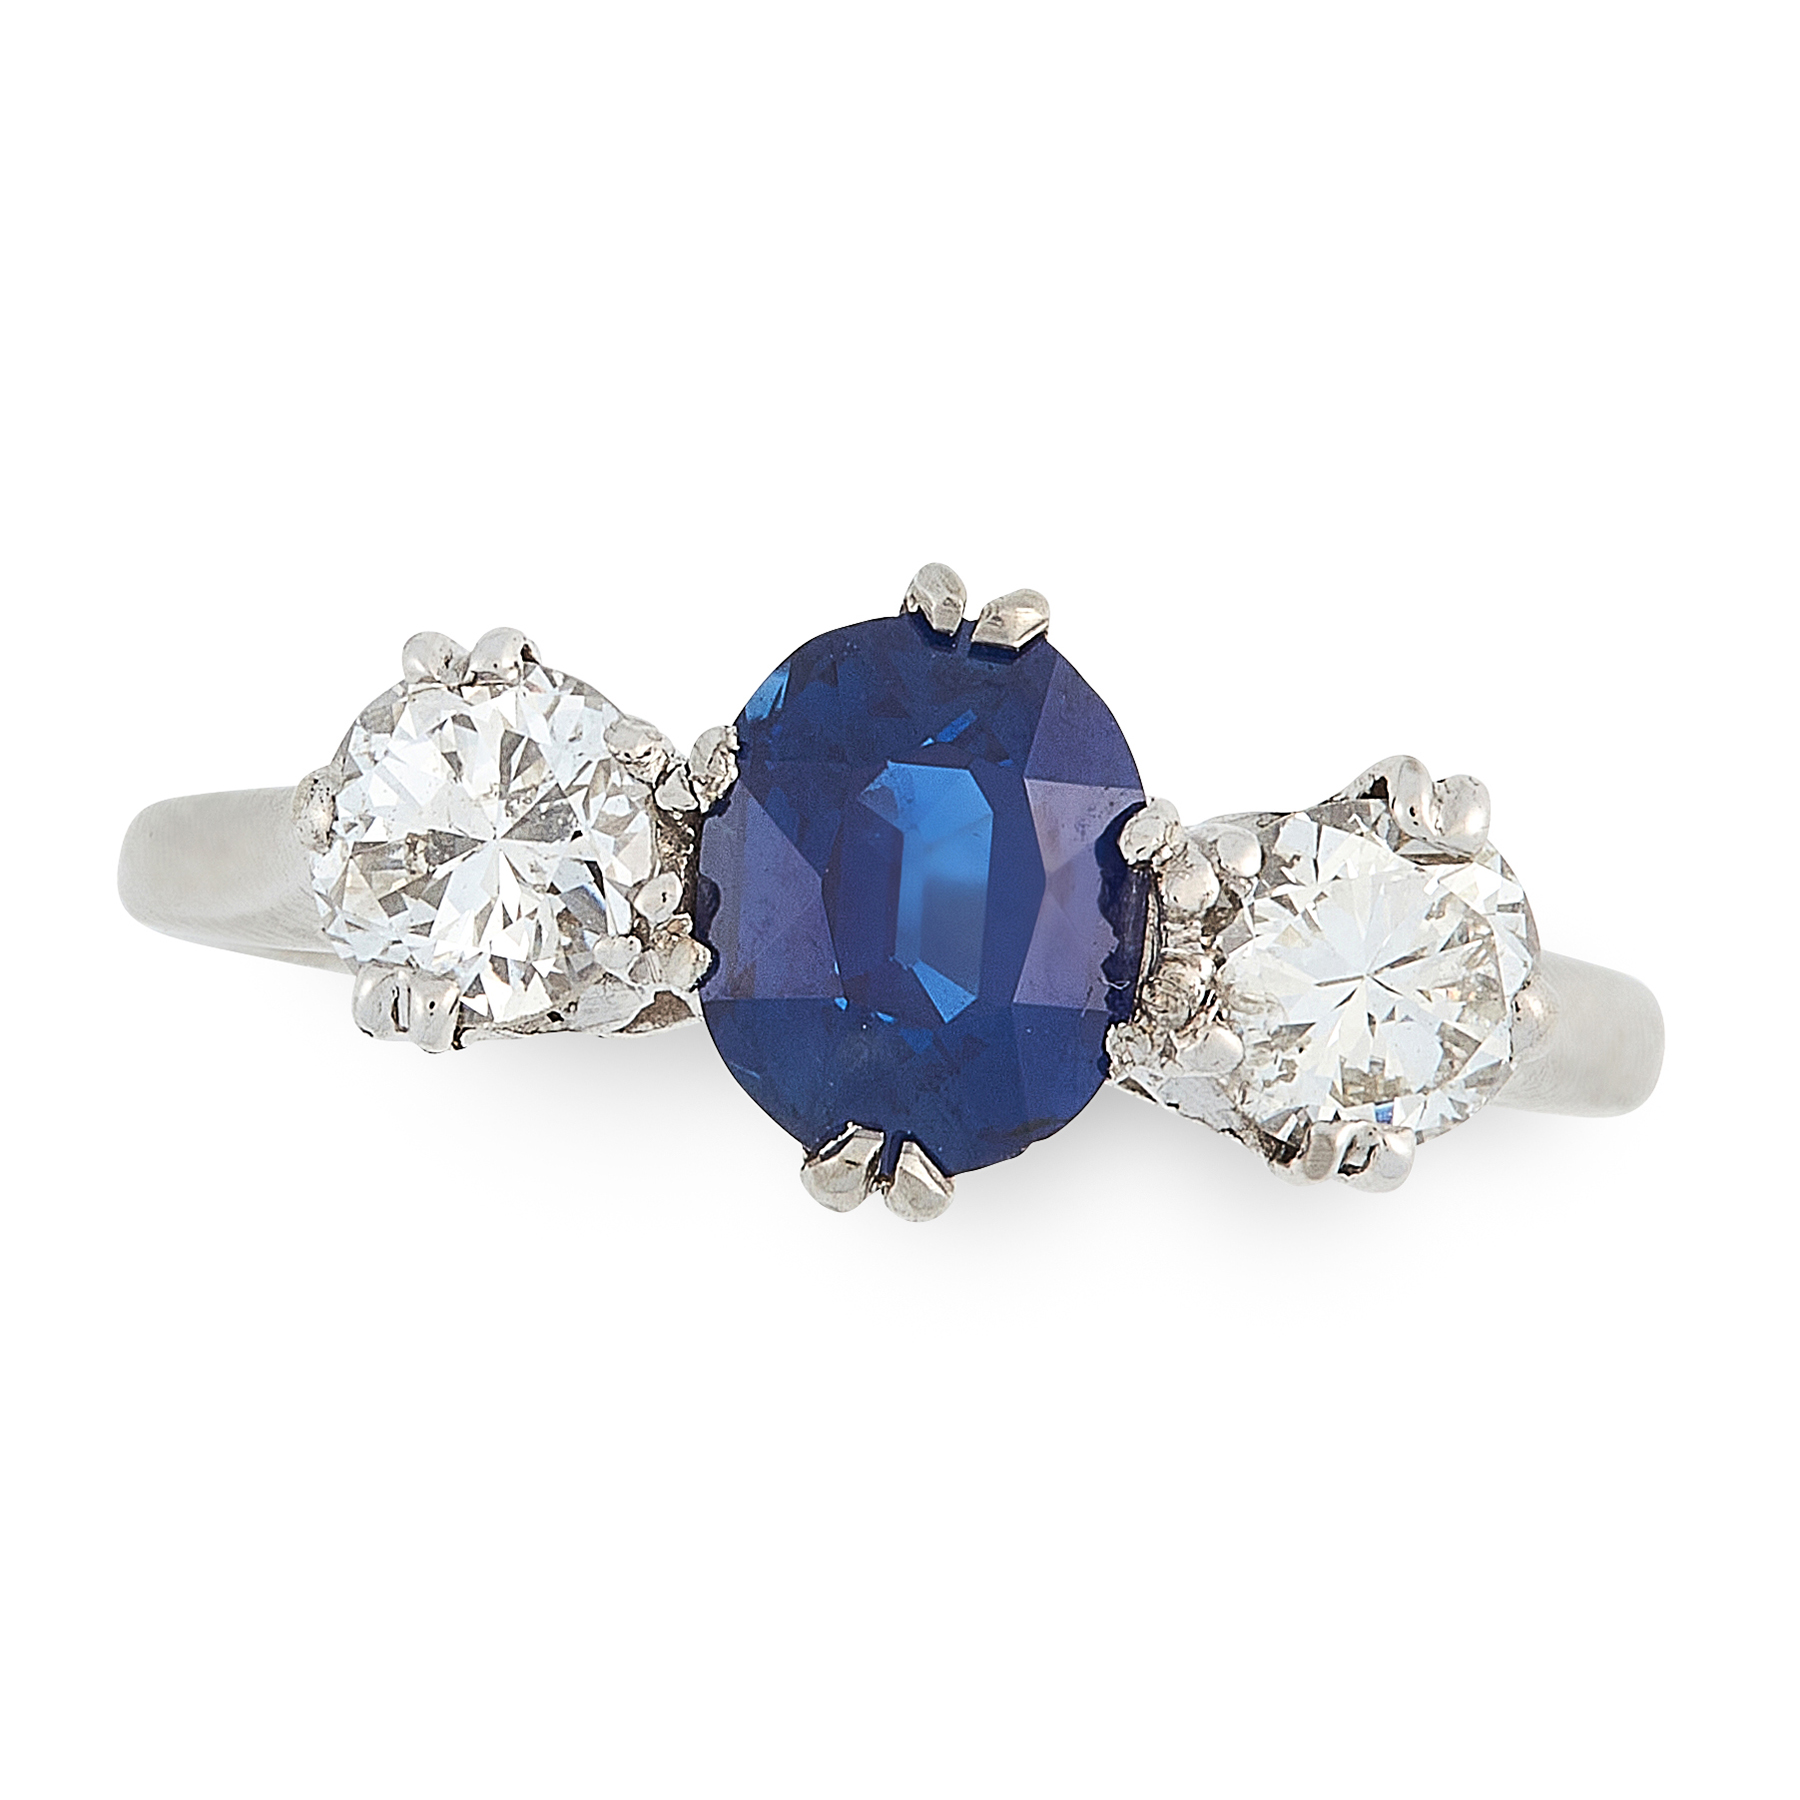 A SAPPHIRE AND DIAMOND DRESS RING set with an oval cut sapphire of 1.10 carats between two round cut